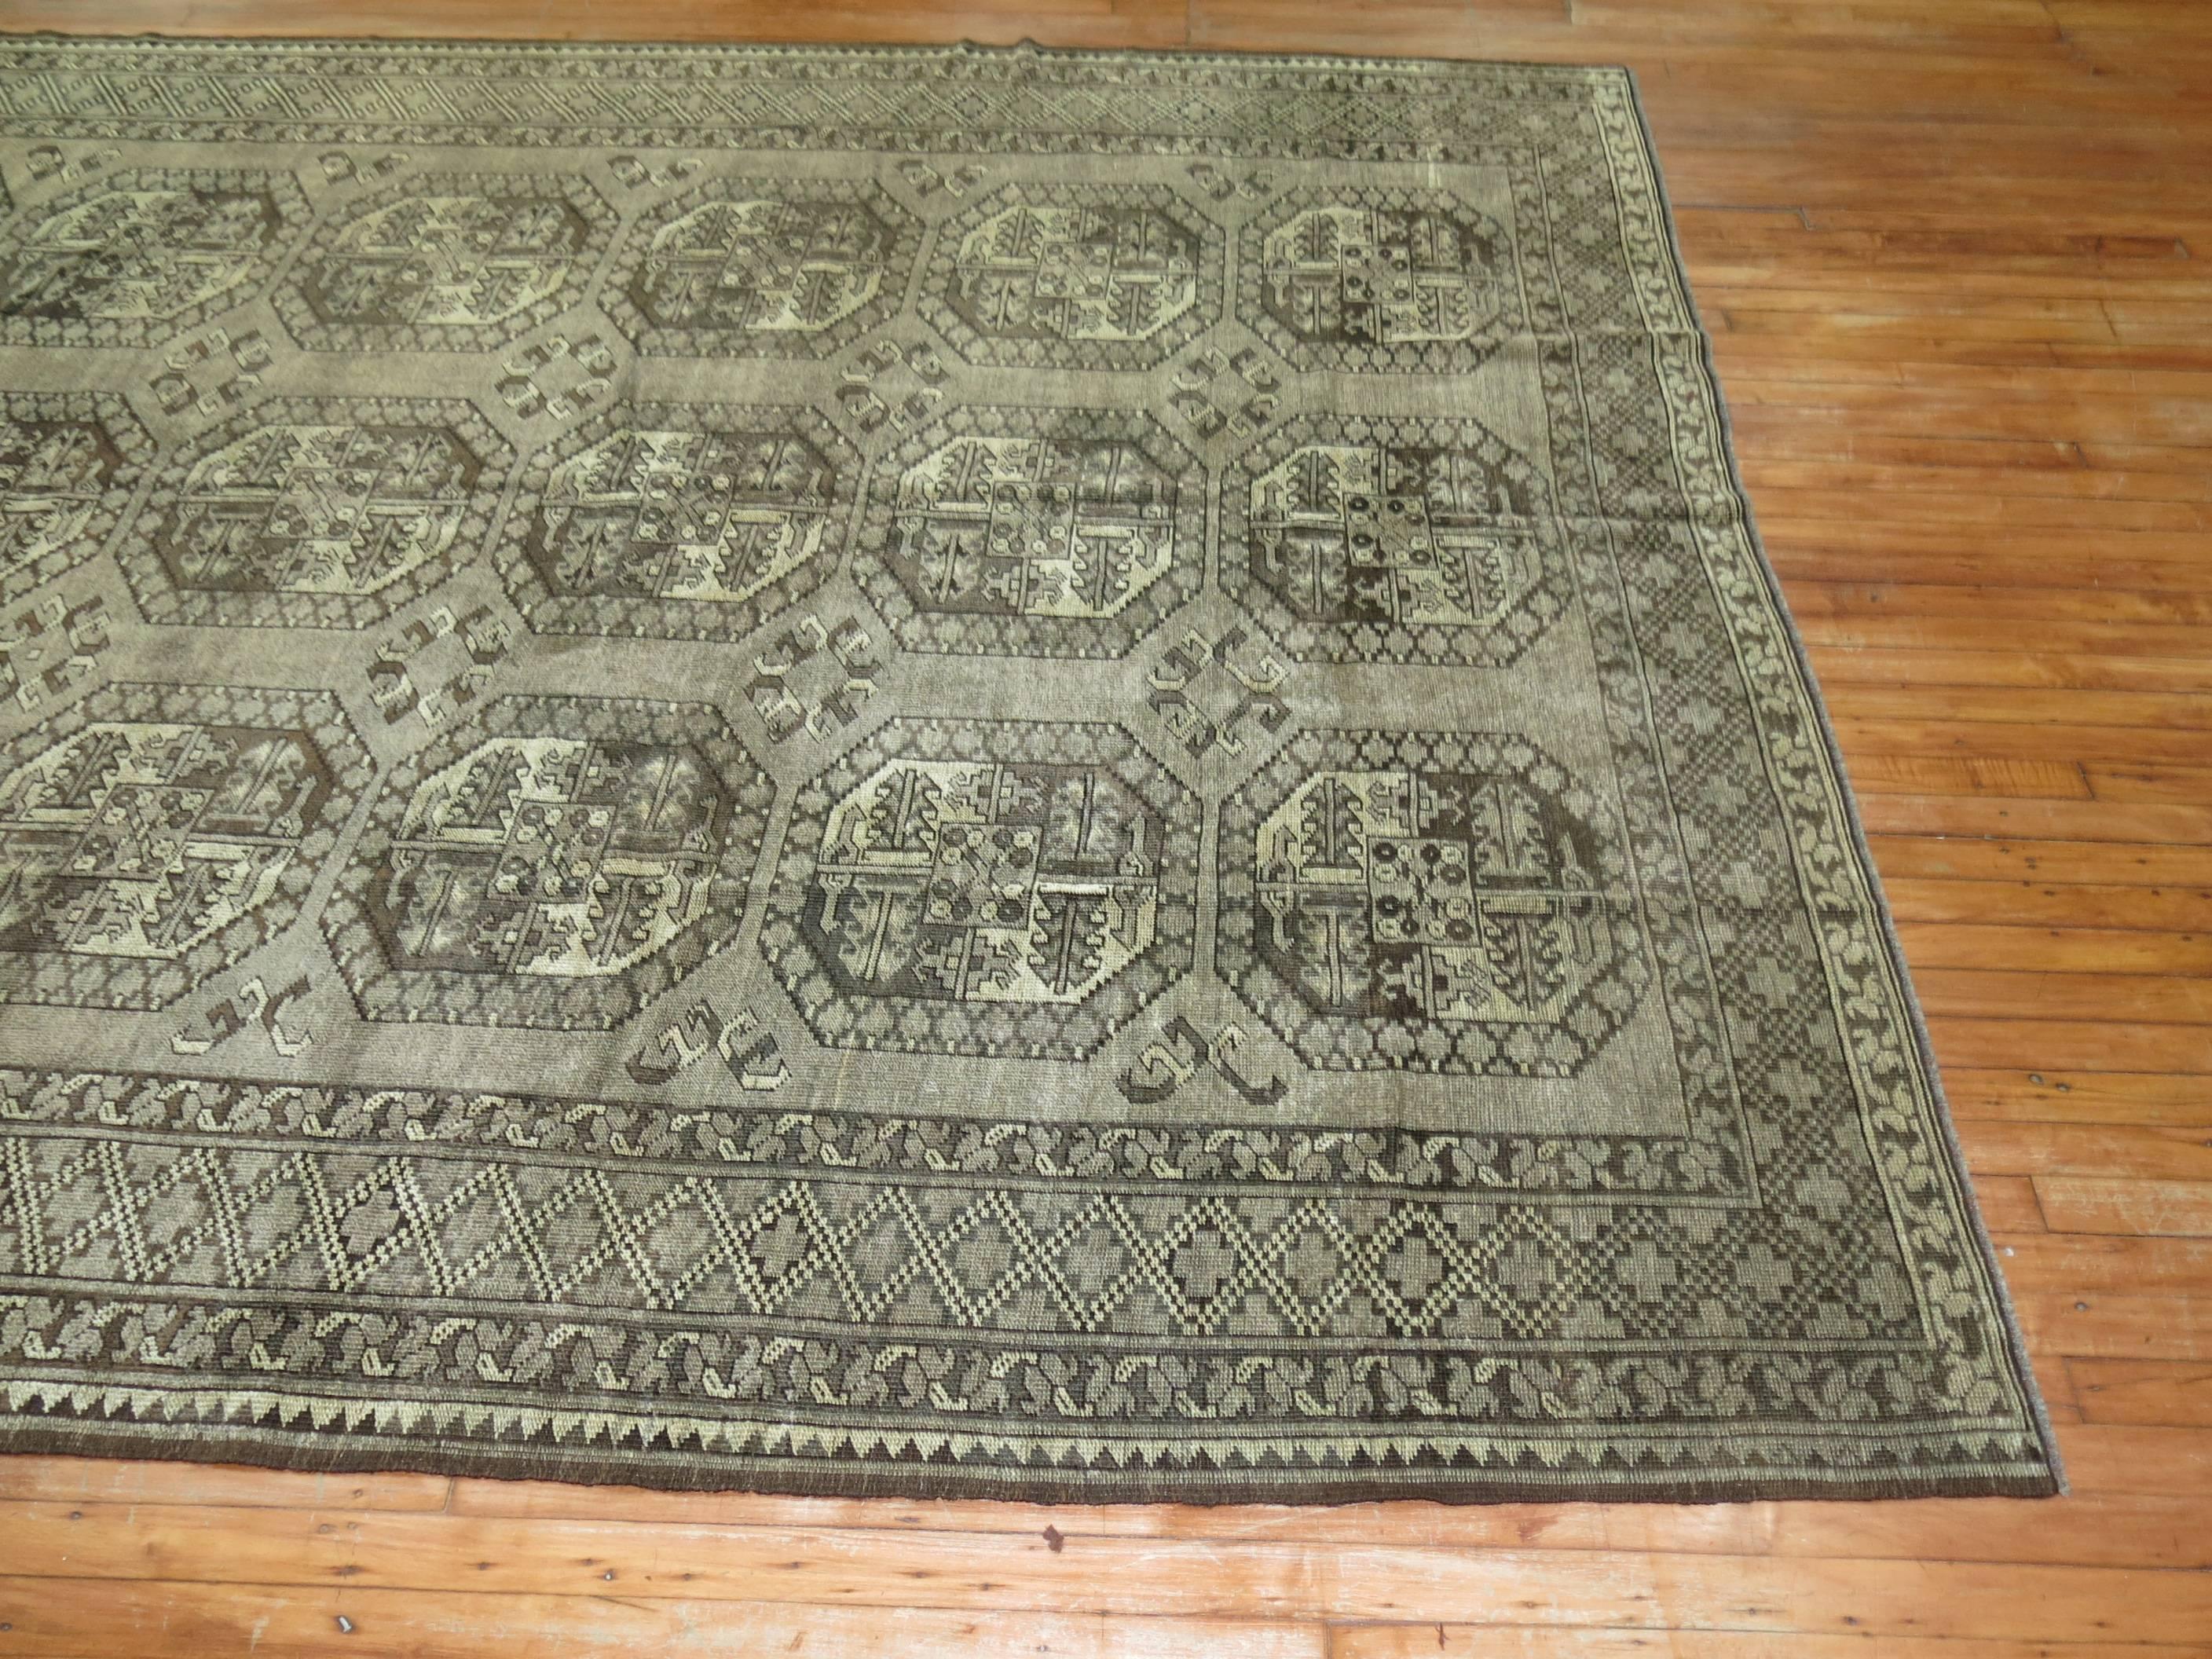 A rare room size Afghan Ersari rug in brown and gray. Usually found in 6 x 9 up to 8 x 10 size formats this one is a full room size piece.